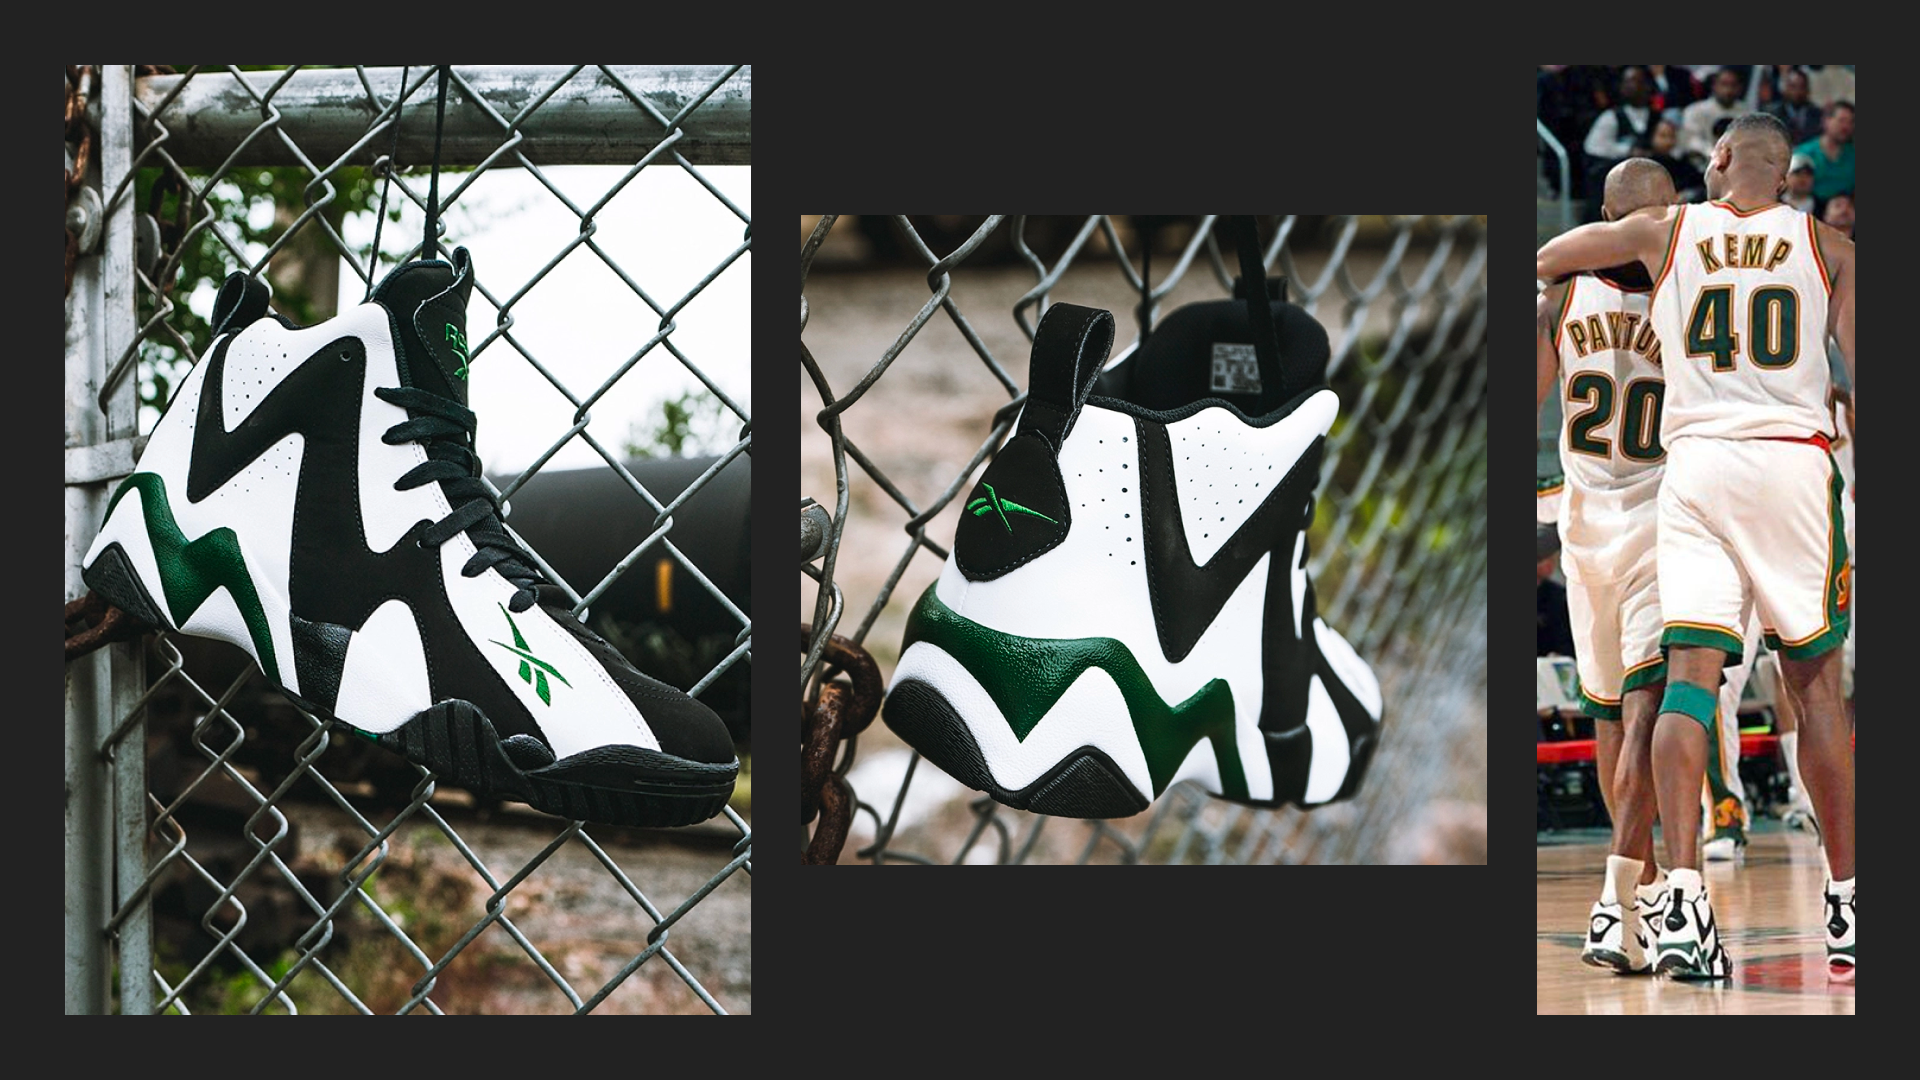 Left and middle: Reebok's 2020 reissue of the 1995 Shawn Kemp Kamikaze (source Reebok). Right: Shawn Kemp on court with his signature shoes (source unknown).